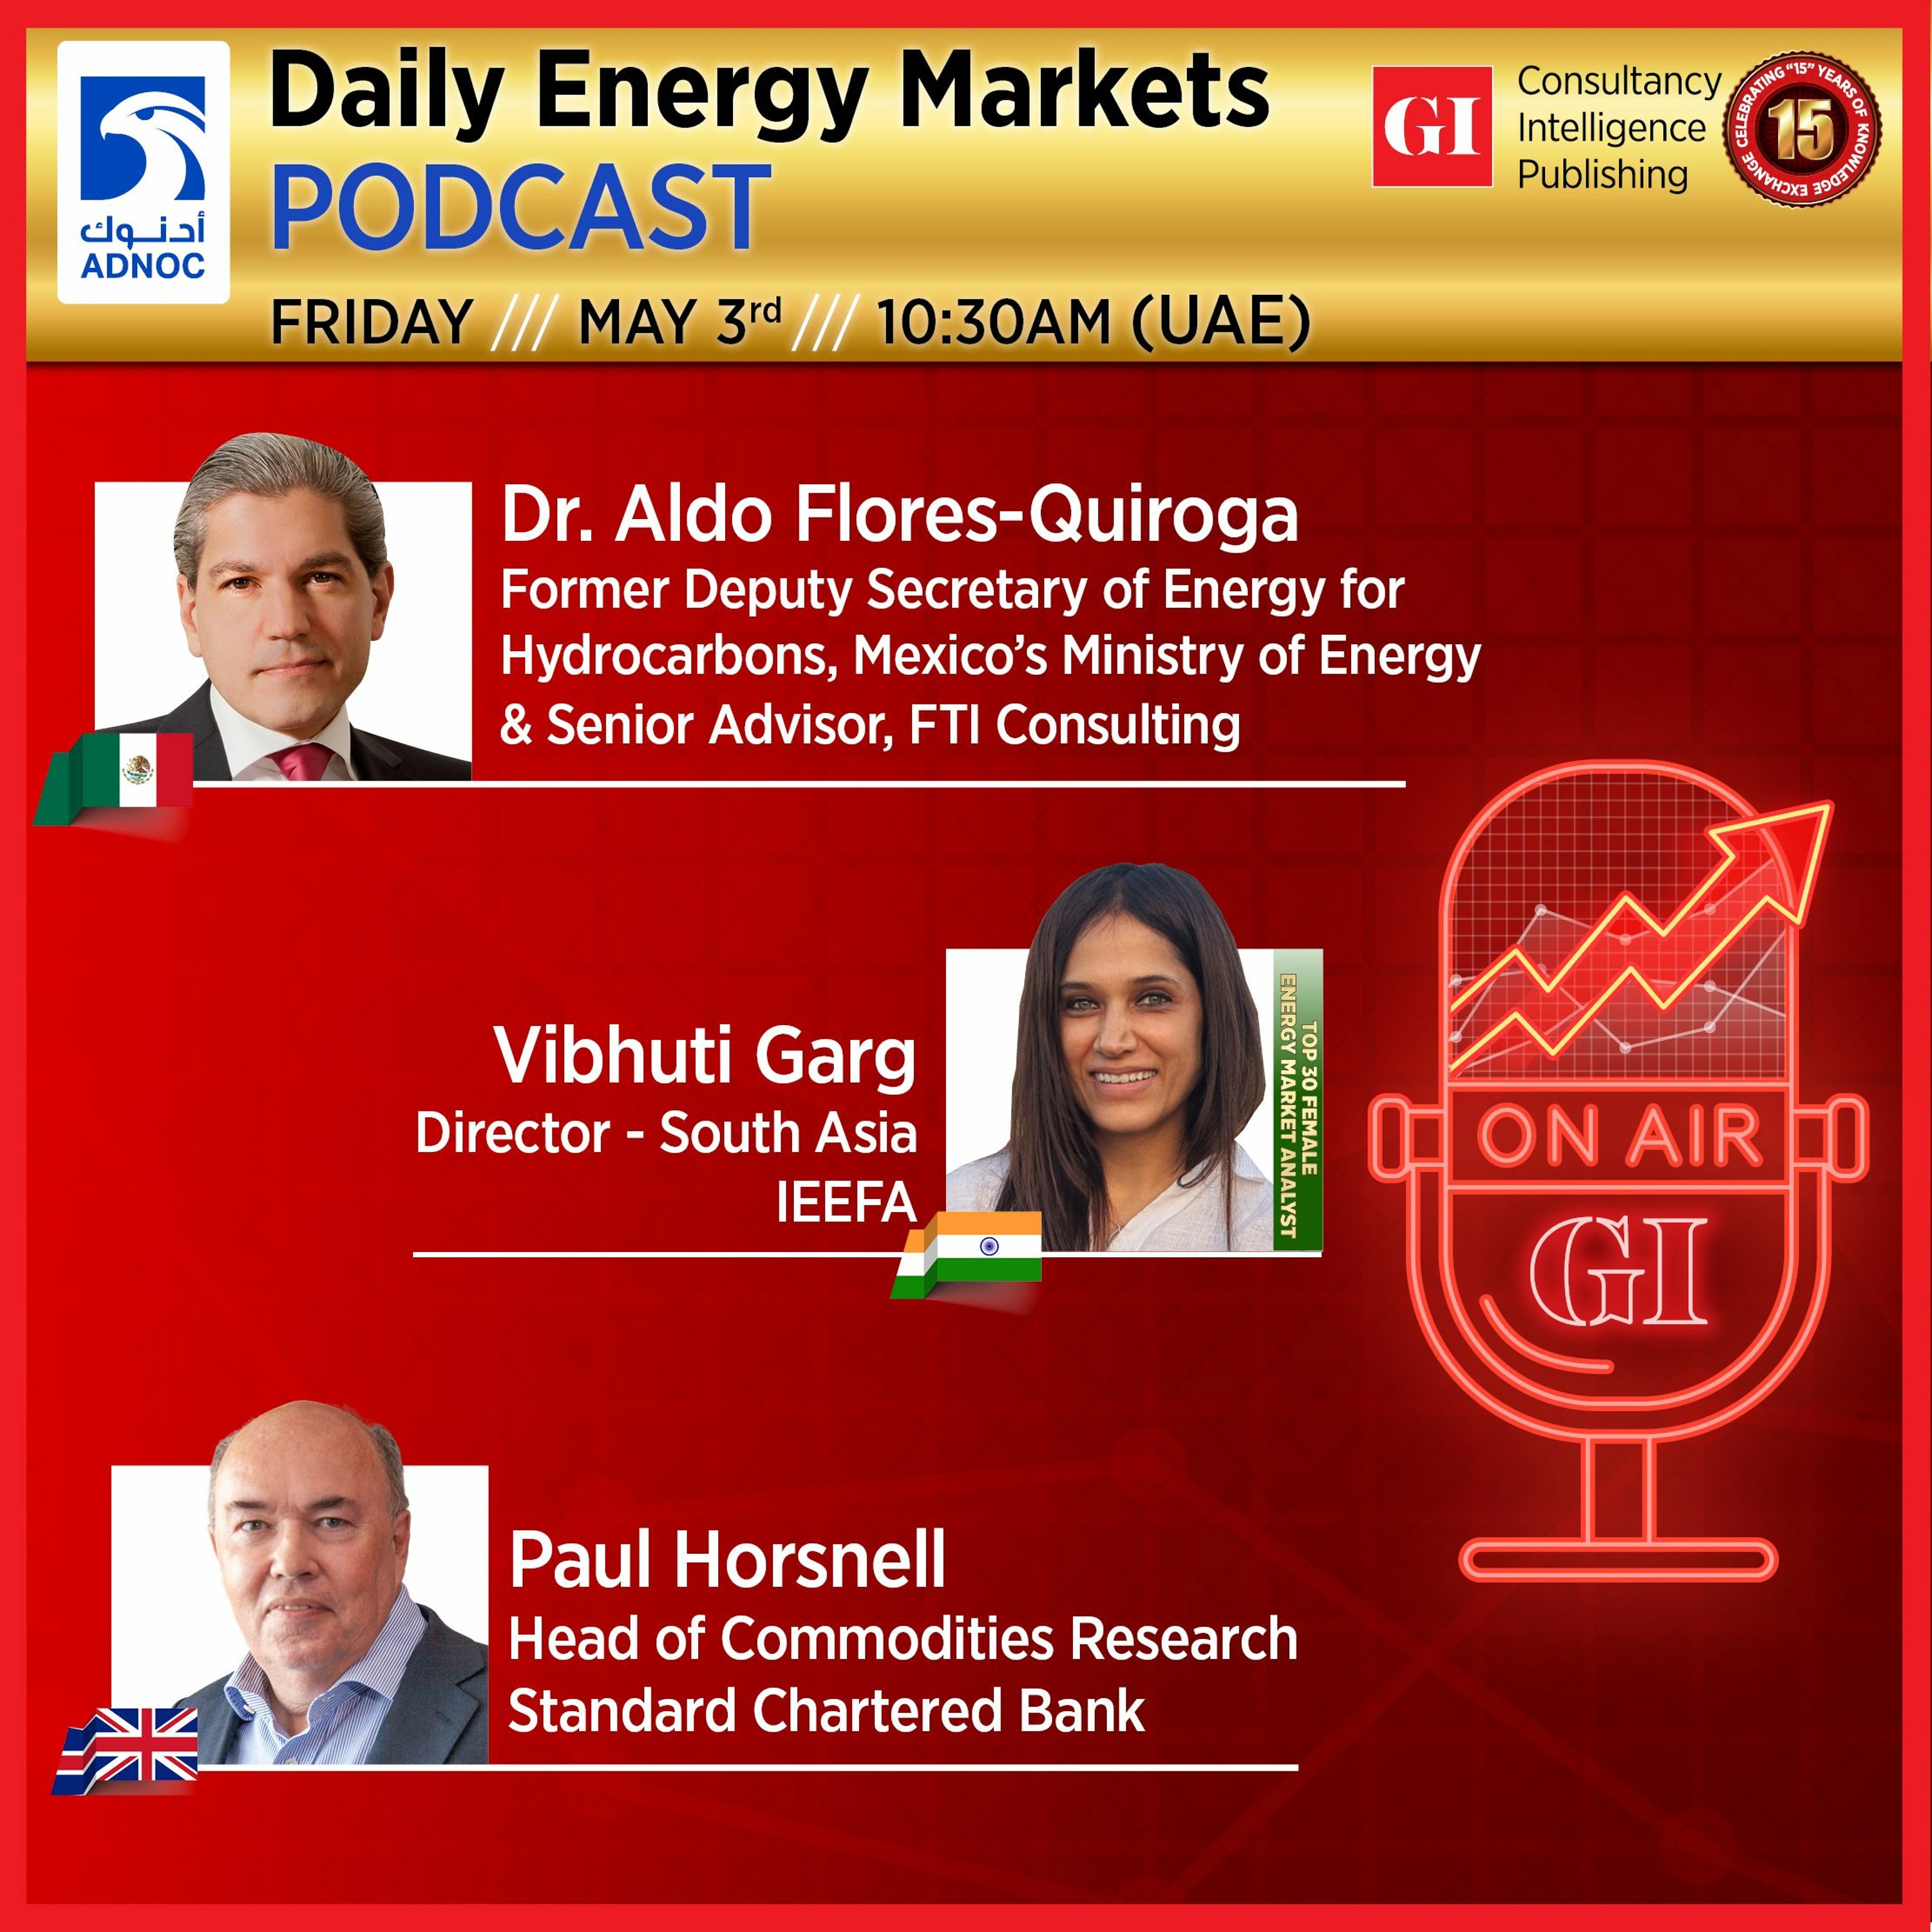 PODCAST: Daily Energy Markets - May 3rd